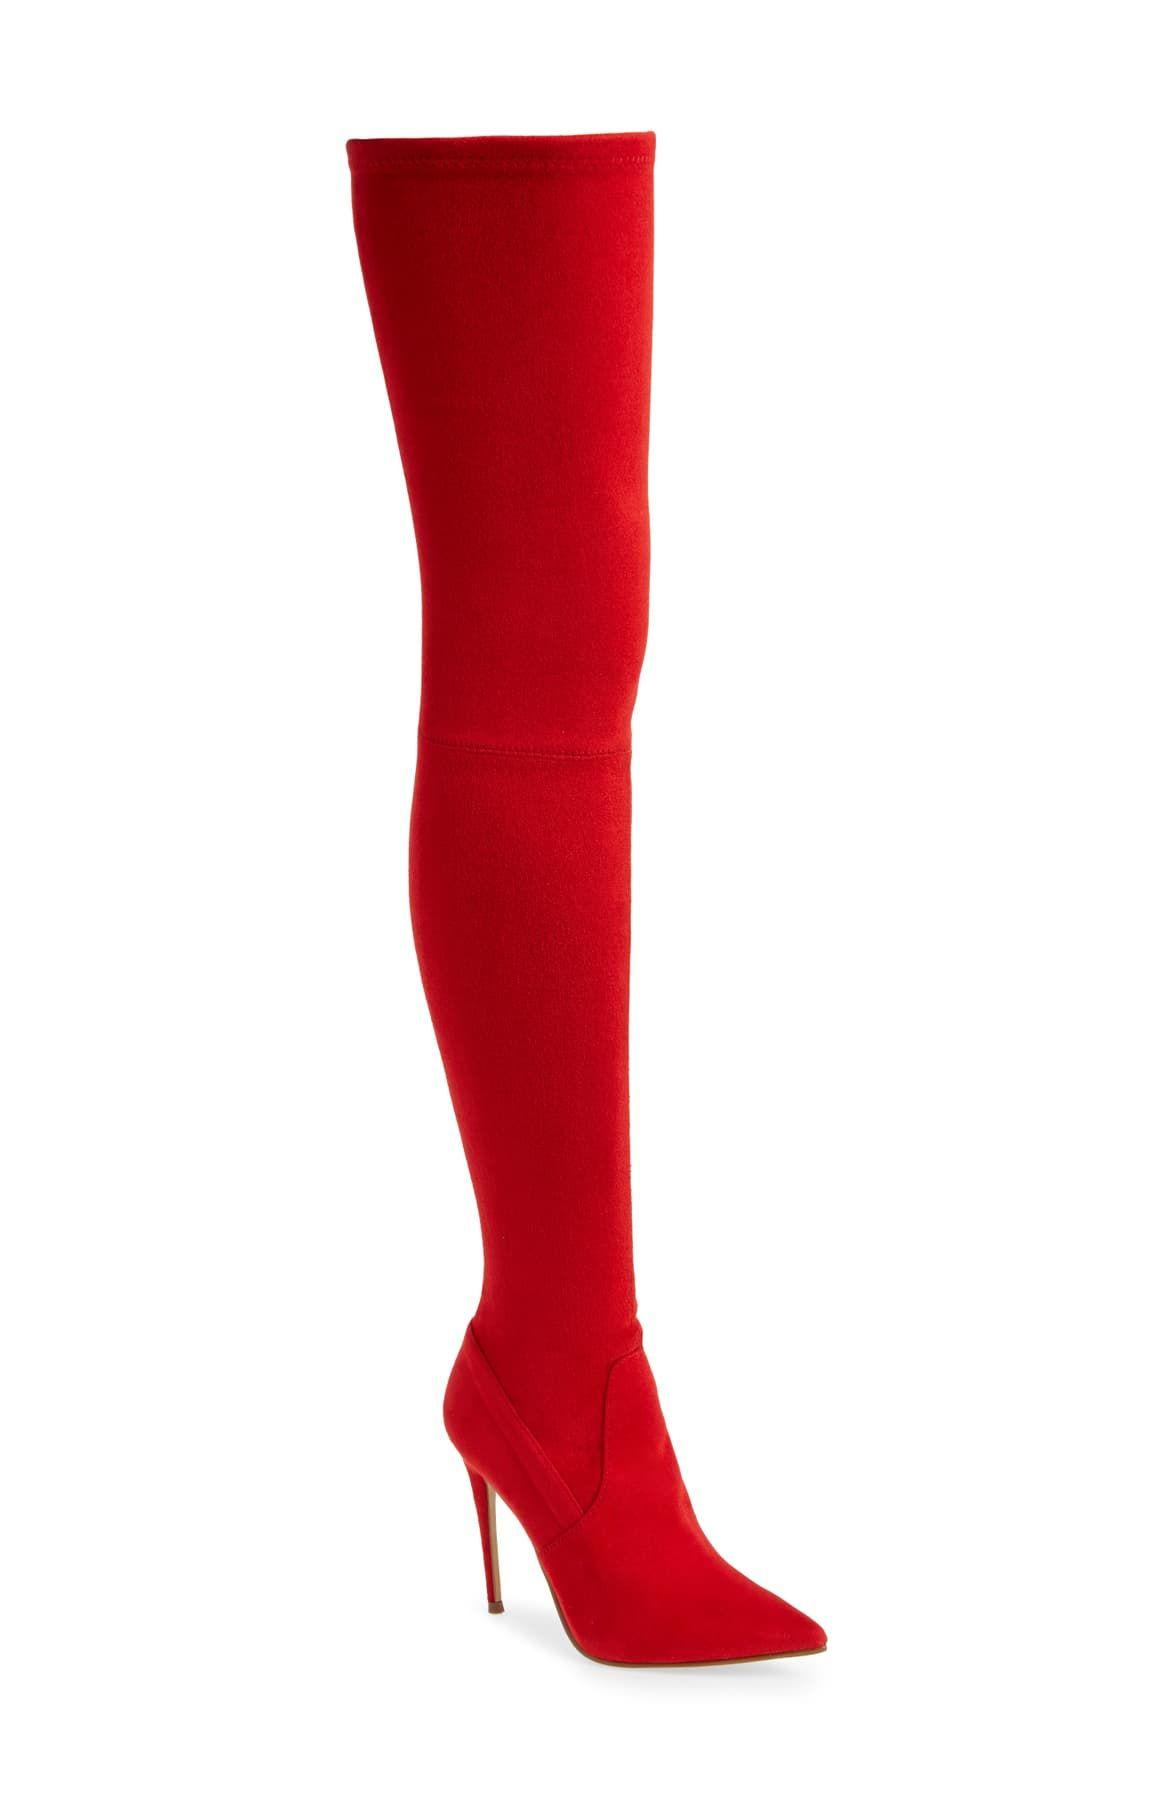 Steve Madden Dominique Thigh High Boot in Red | Lyst